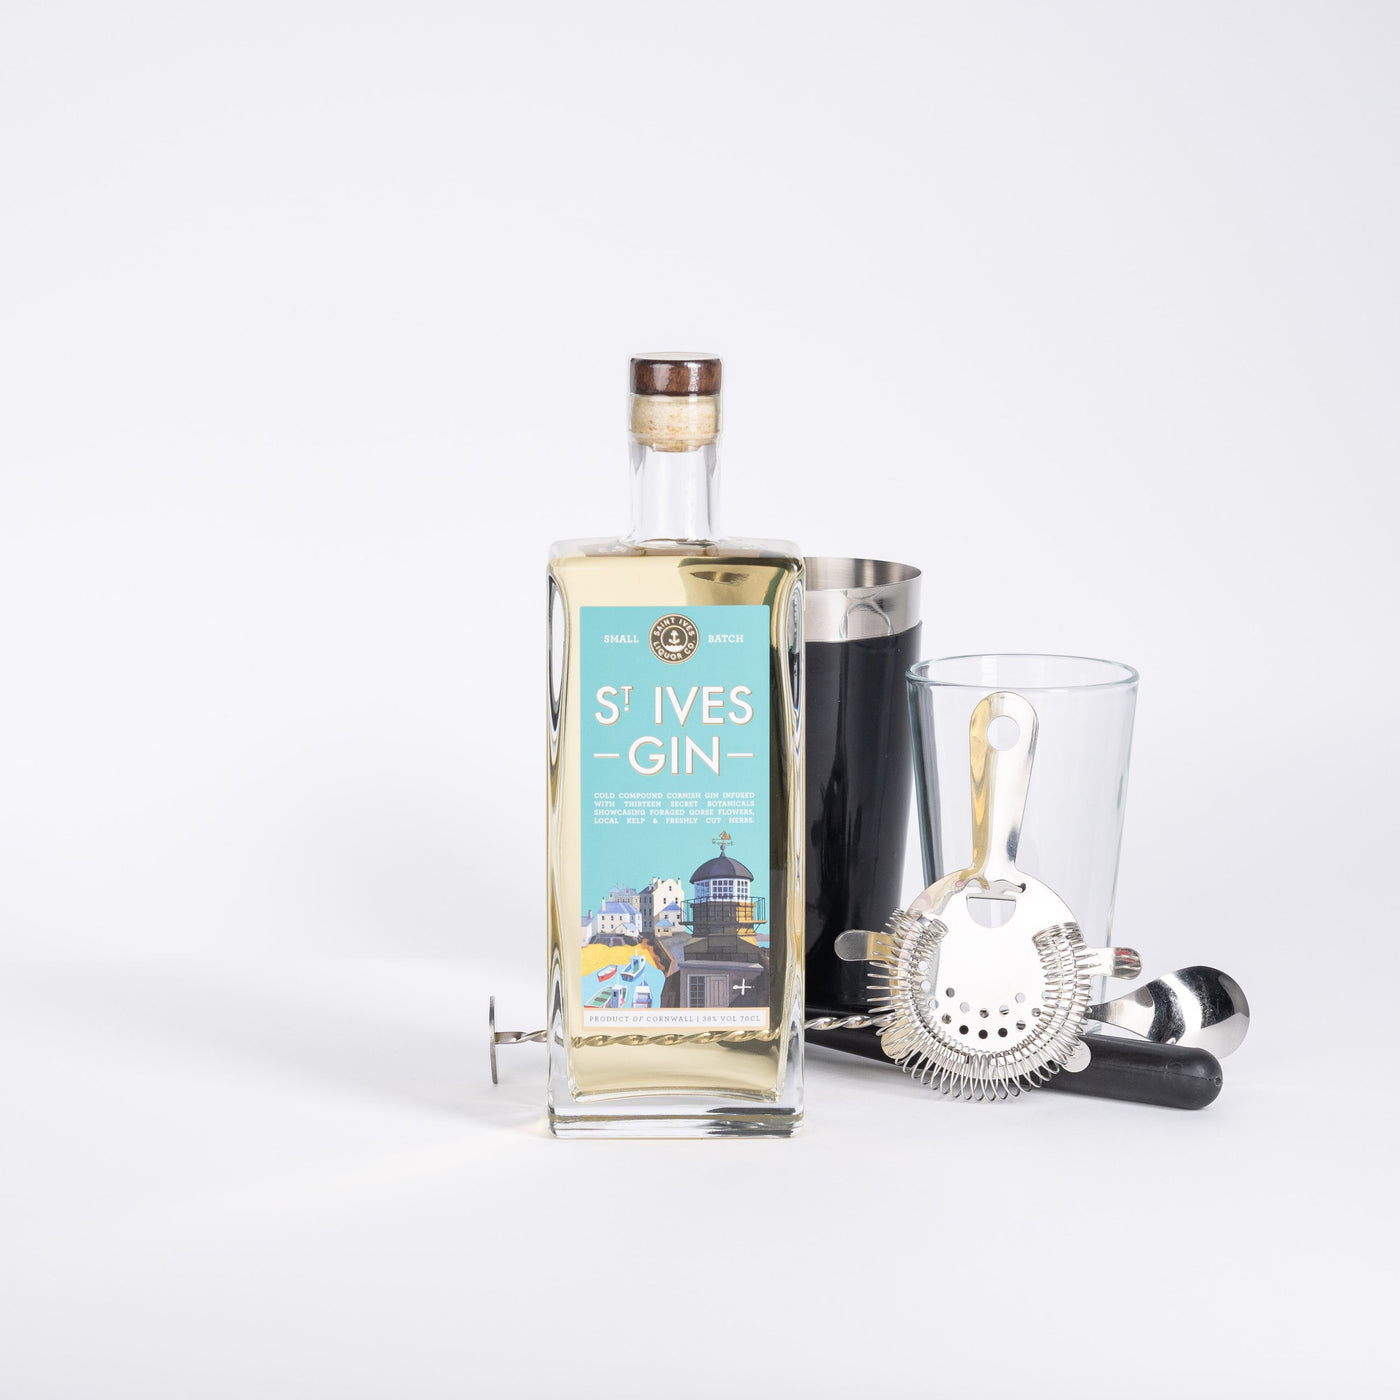 St Ives Gin